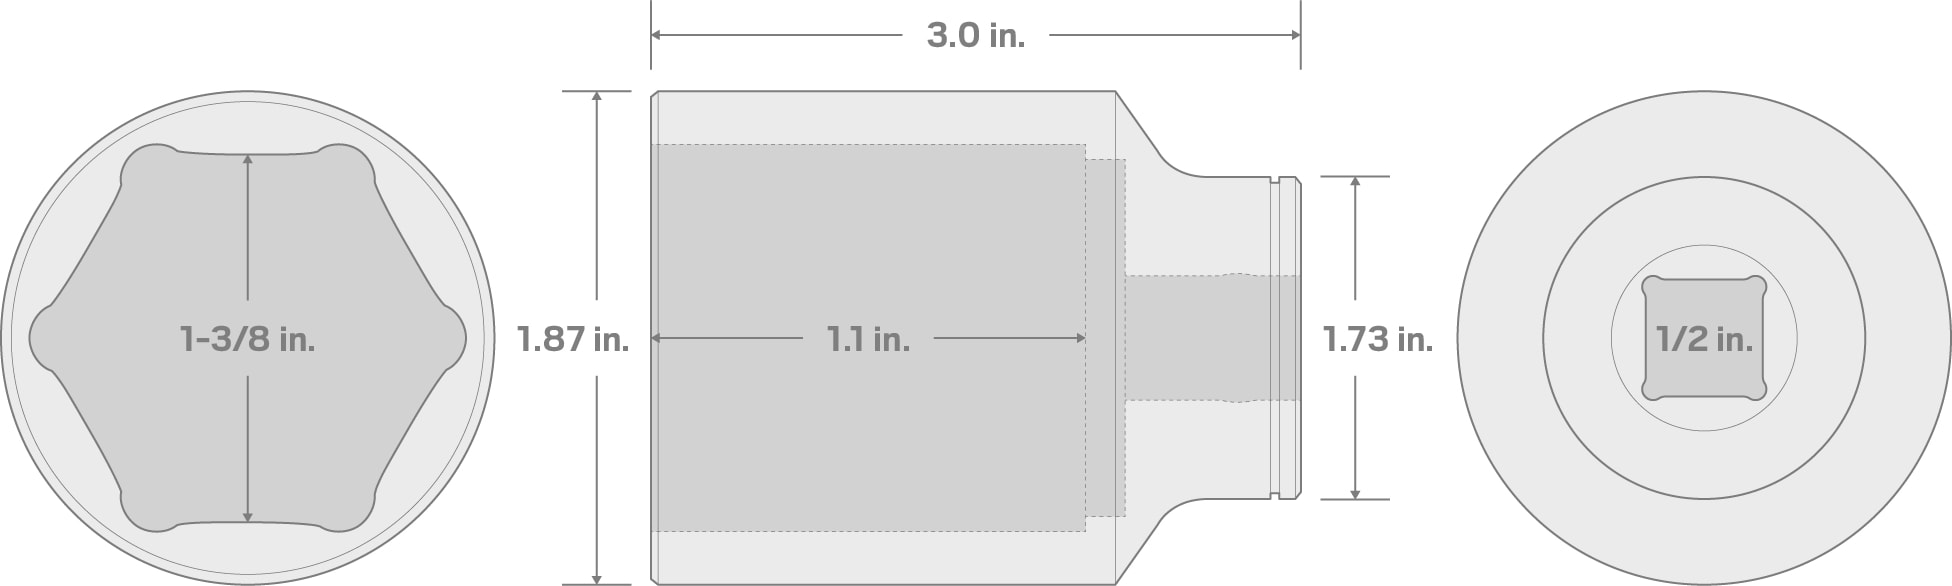 Specs for 1/2 Inch Drive x 1-3/8 Inch Deep 6-Point Socket